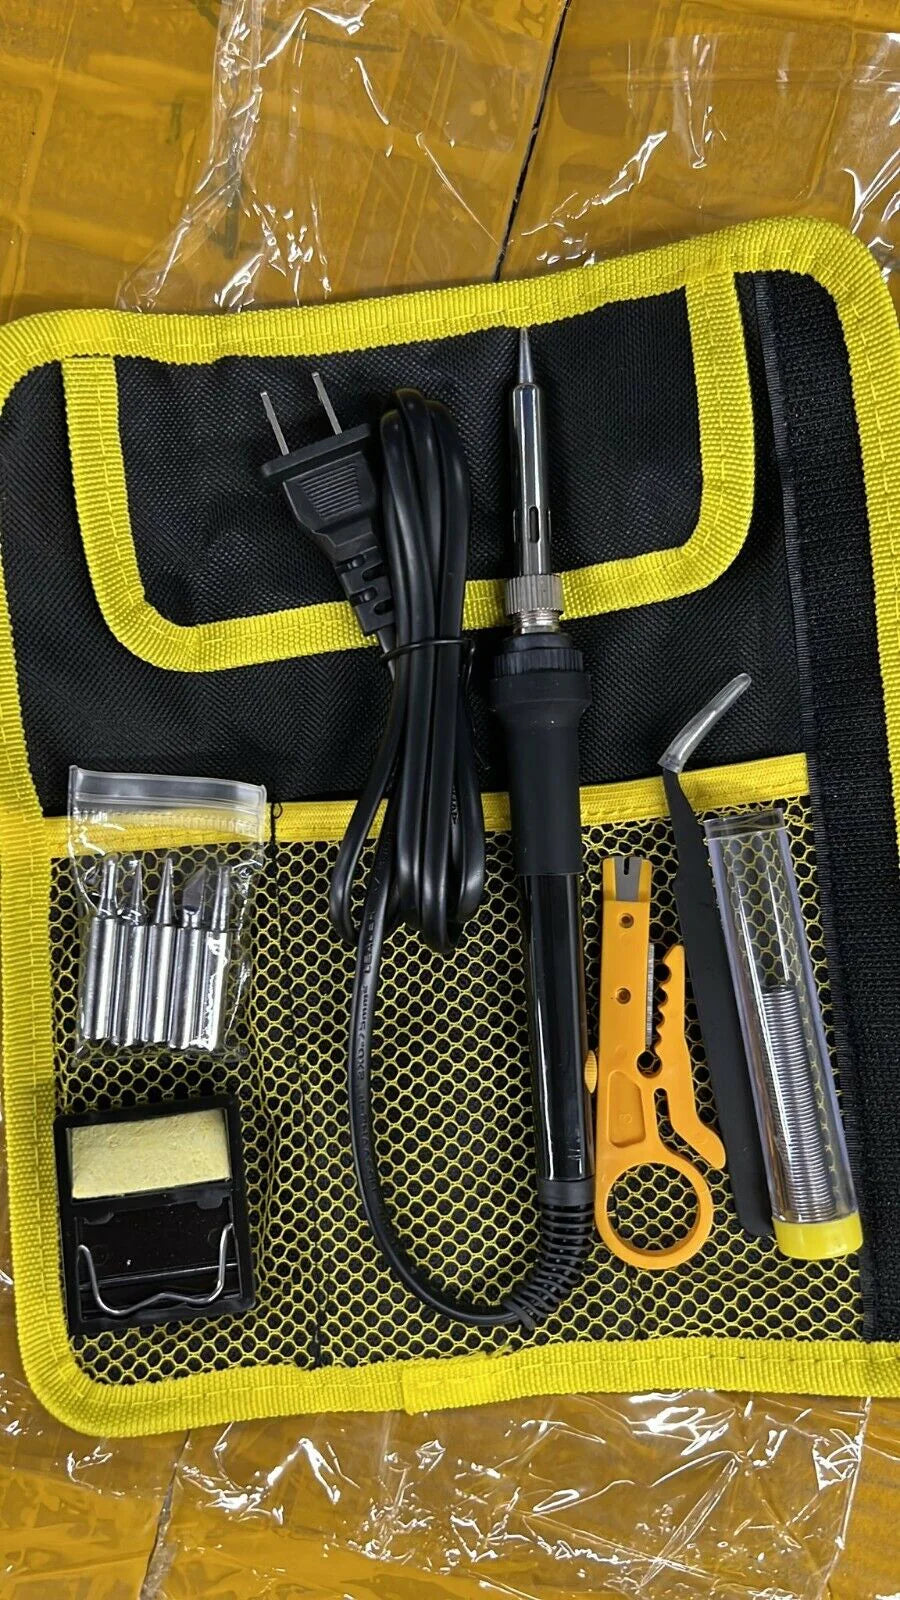 Electric Soldering Iron Kit - Achieve Precision with our Spectacular 60W 110V Adjustable Temperature Welding Gun Tool Set